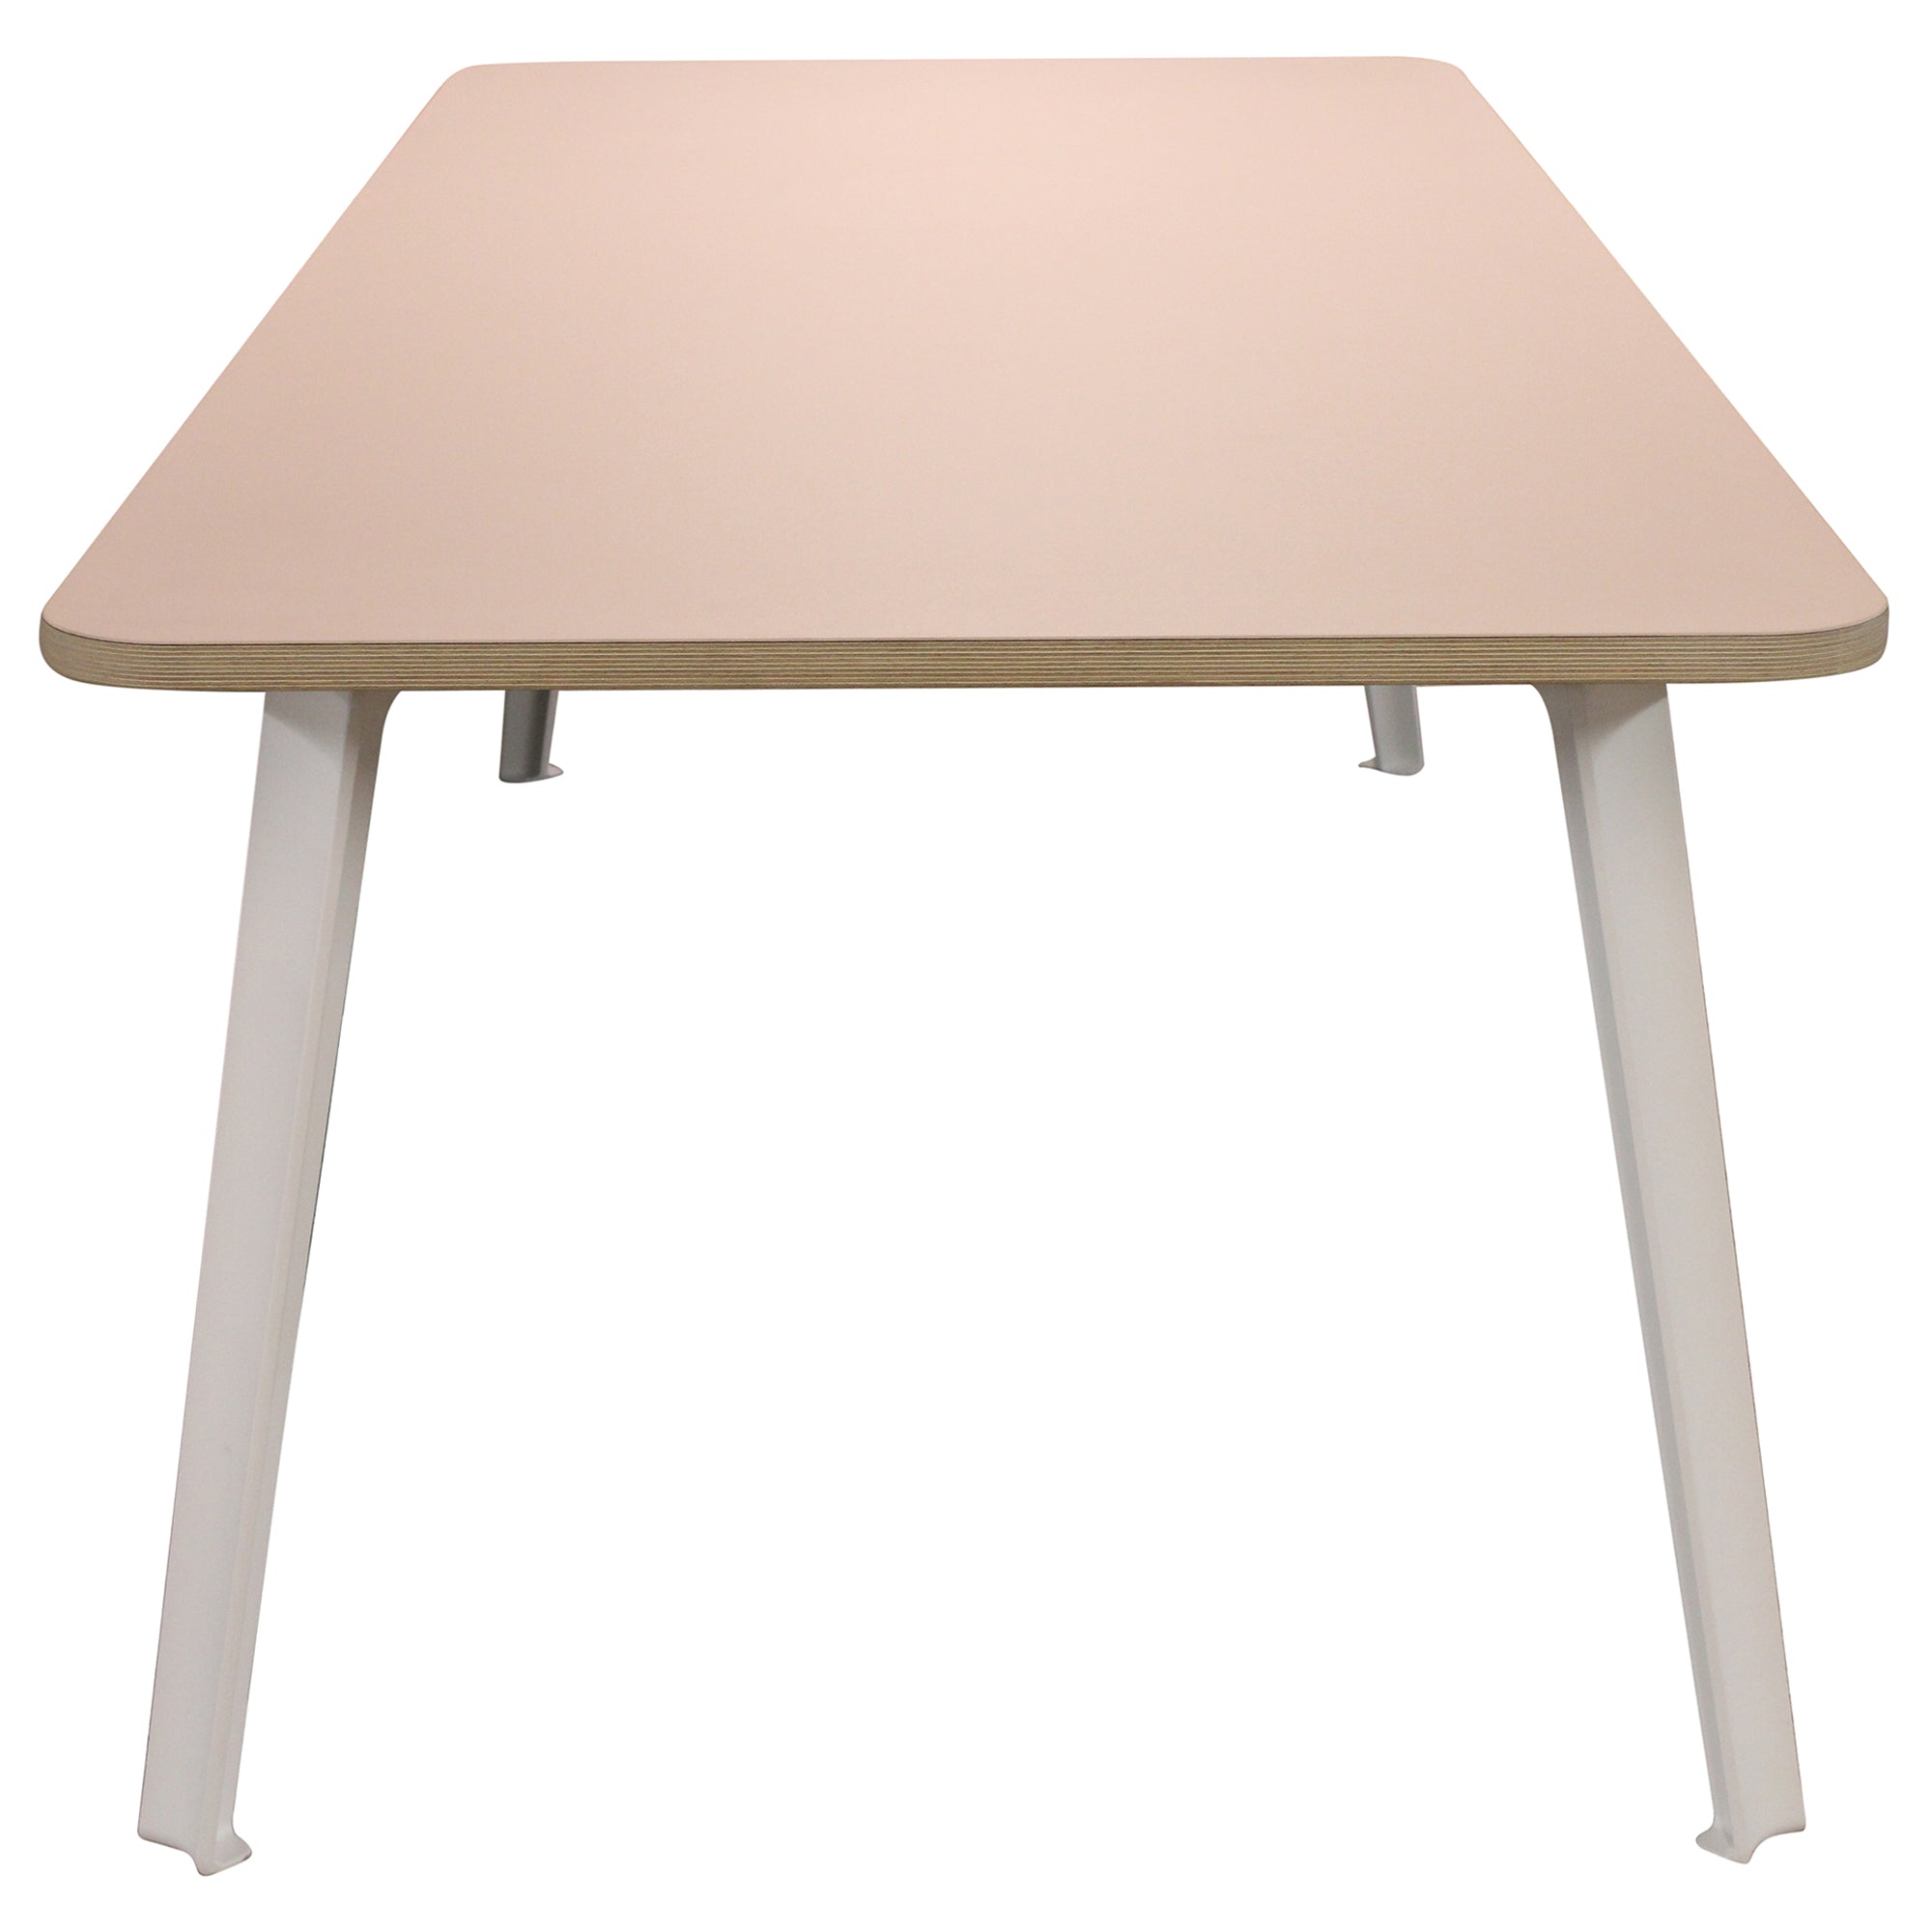 The Table by Floyd, 96in, Blush - Preowned